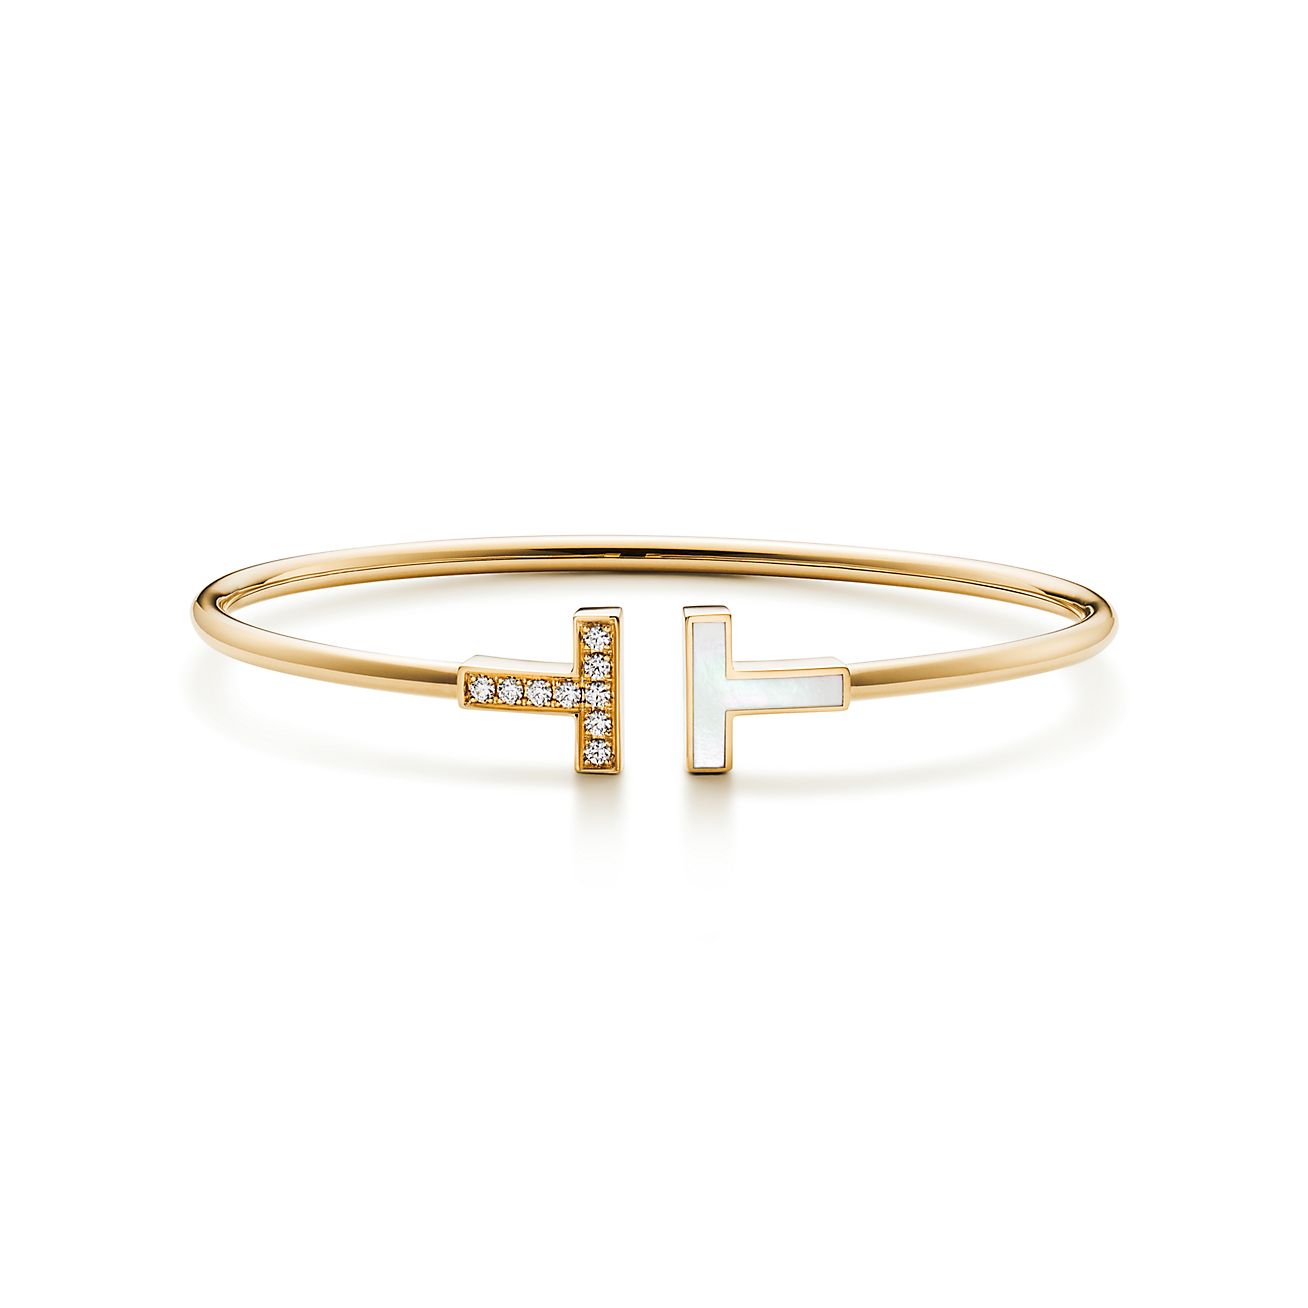 Tiffany TWire Bracelet in Yellow Gold with Mother-of-pearl and Diamonds